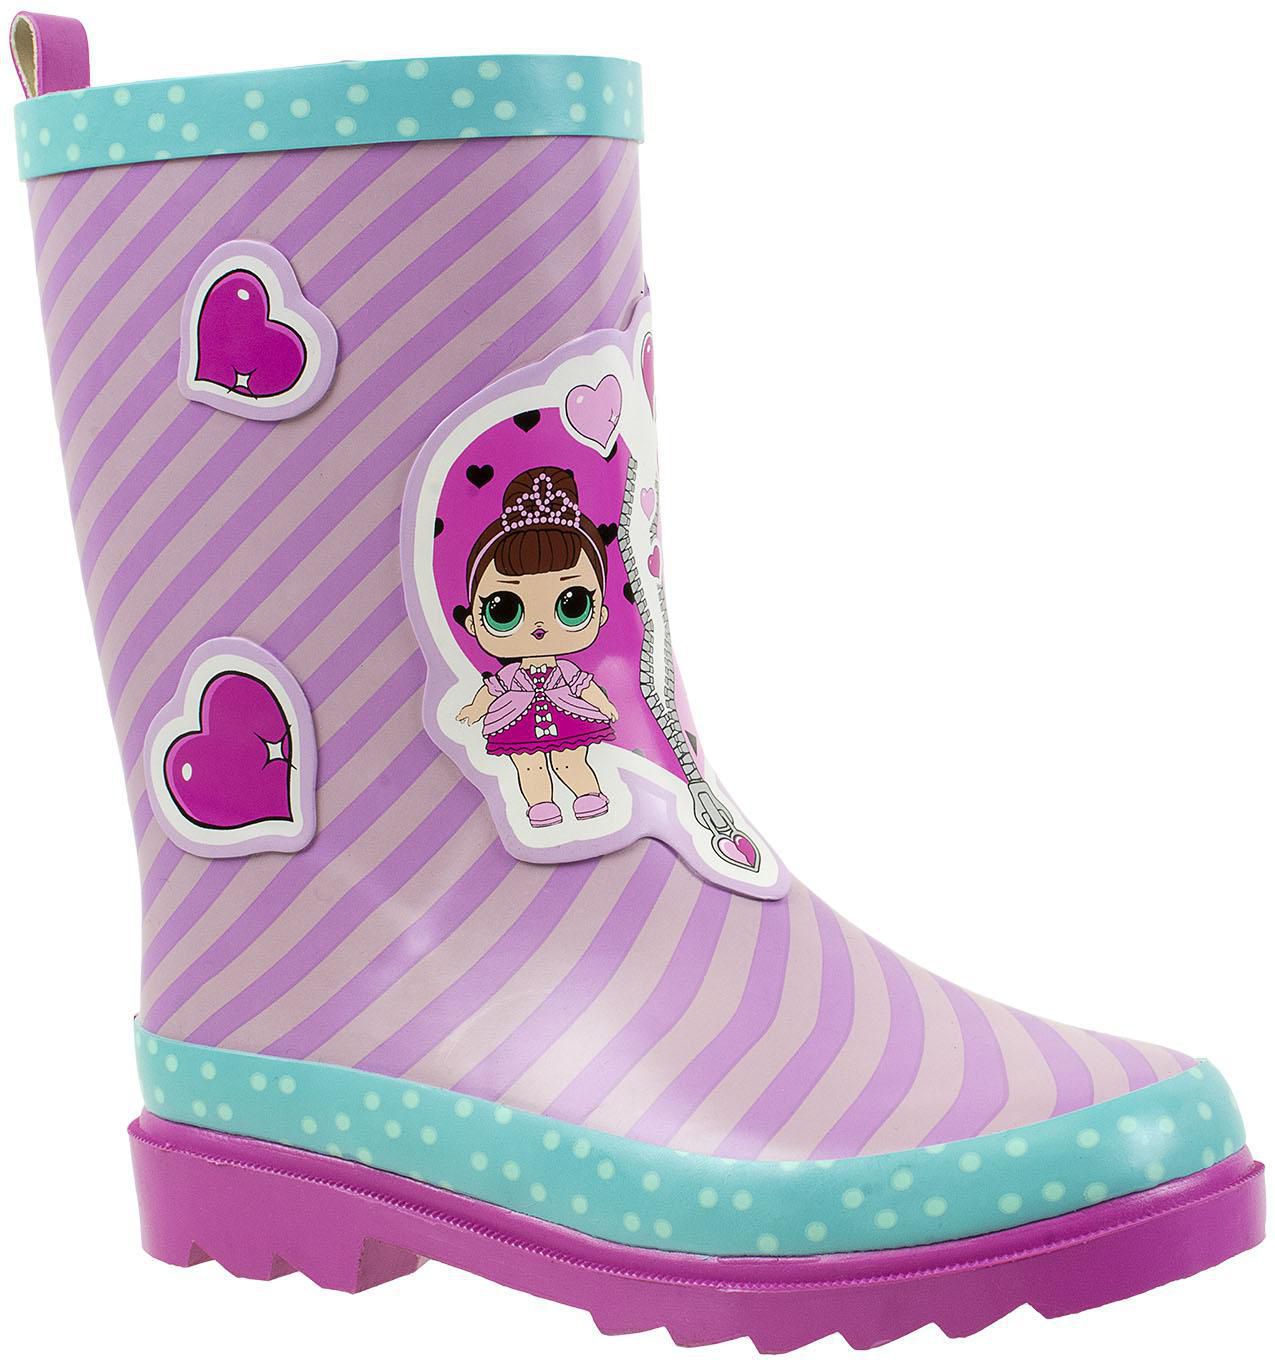 Surprise Girls Rain Boots,Mid Height Slip On Boots,Toddler size 9 to Kids size 2 L.O.L 